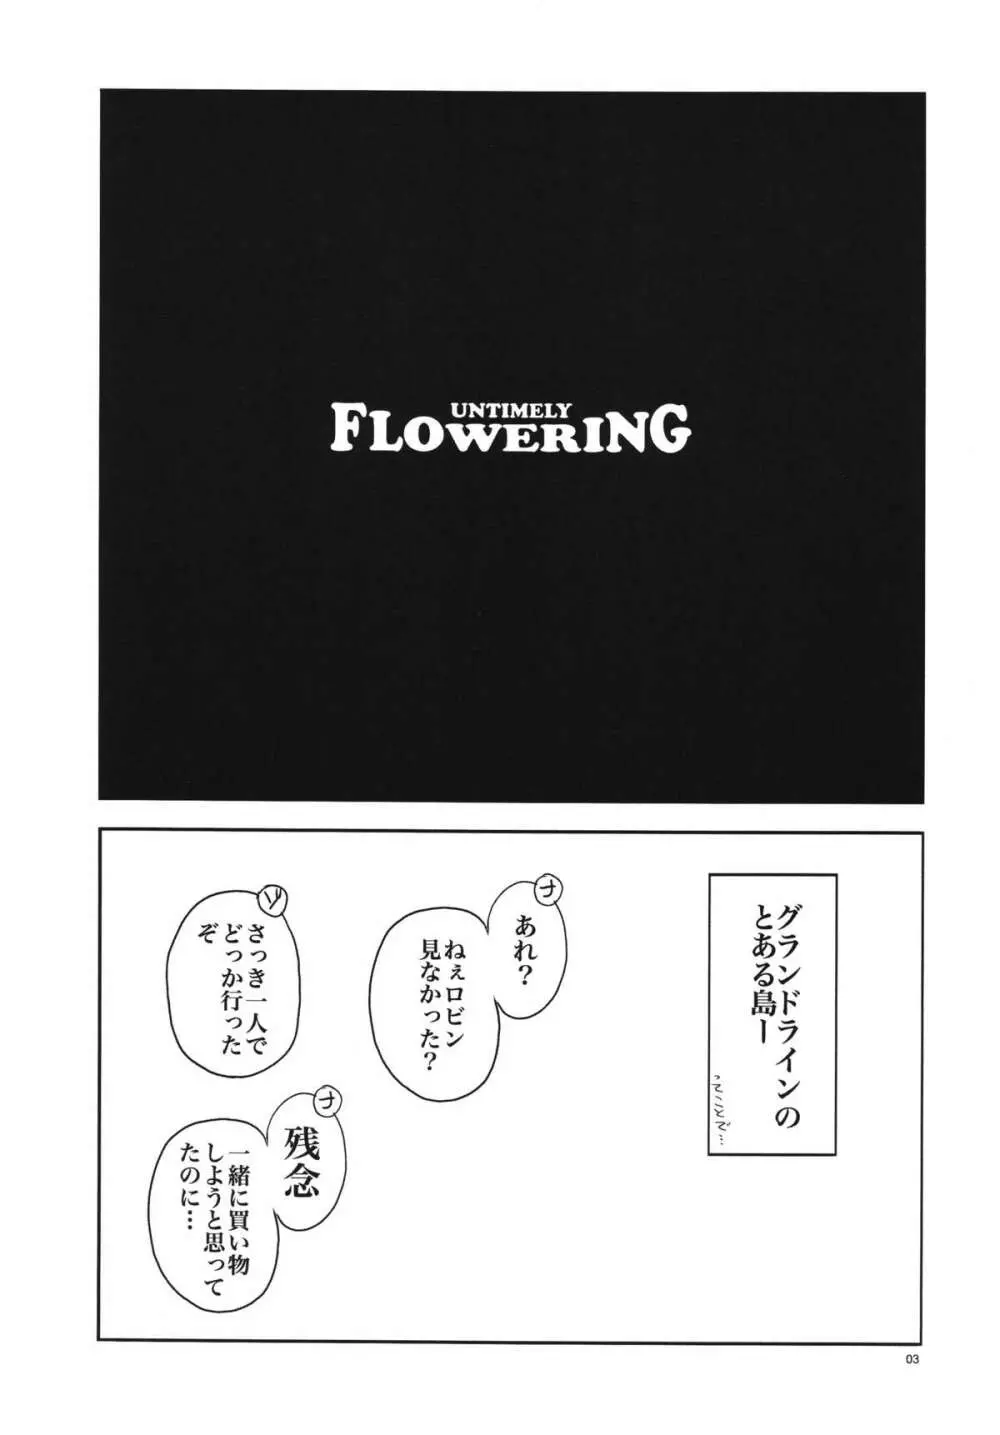 UNTIMELY FLOWERING Page.2